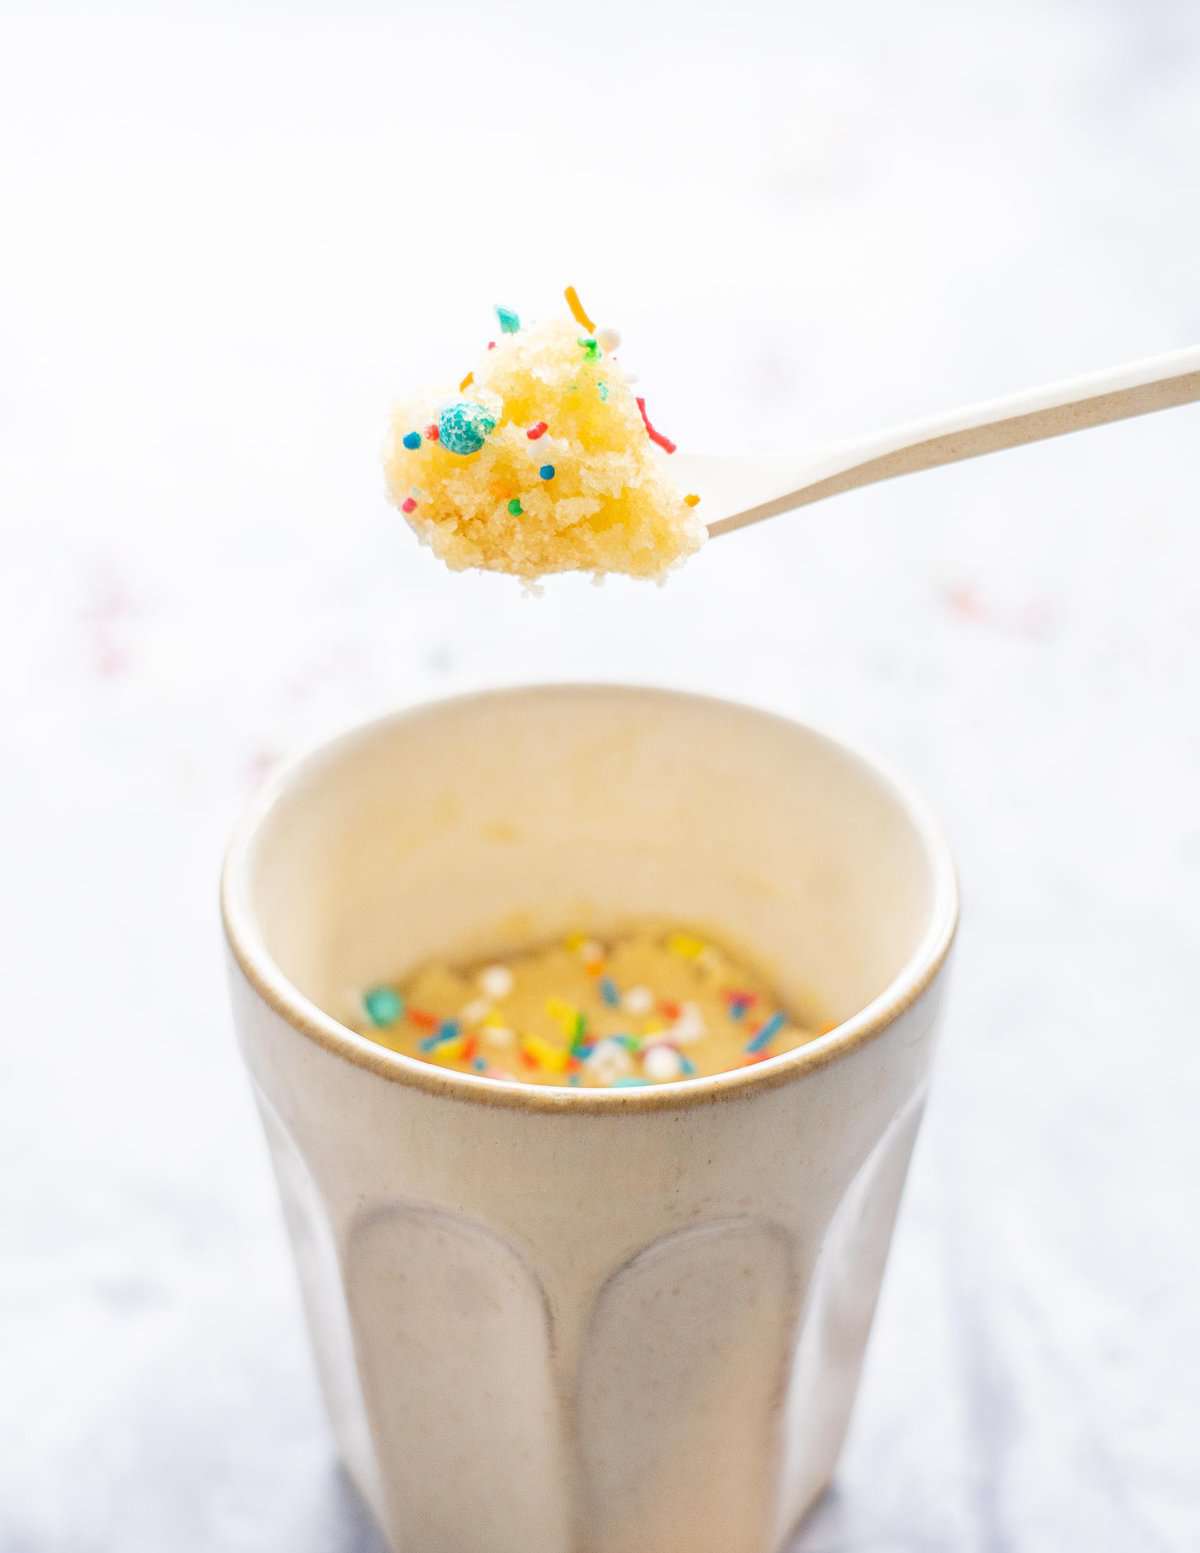 A spoon of vanilla cake decorated with sprinkles being held above a coffee mug